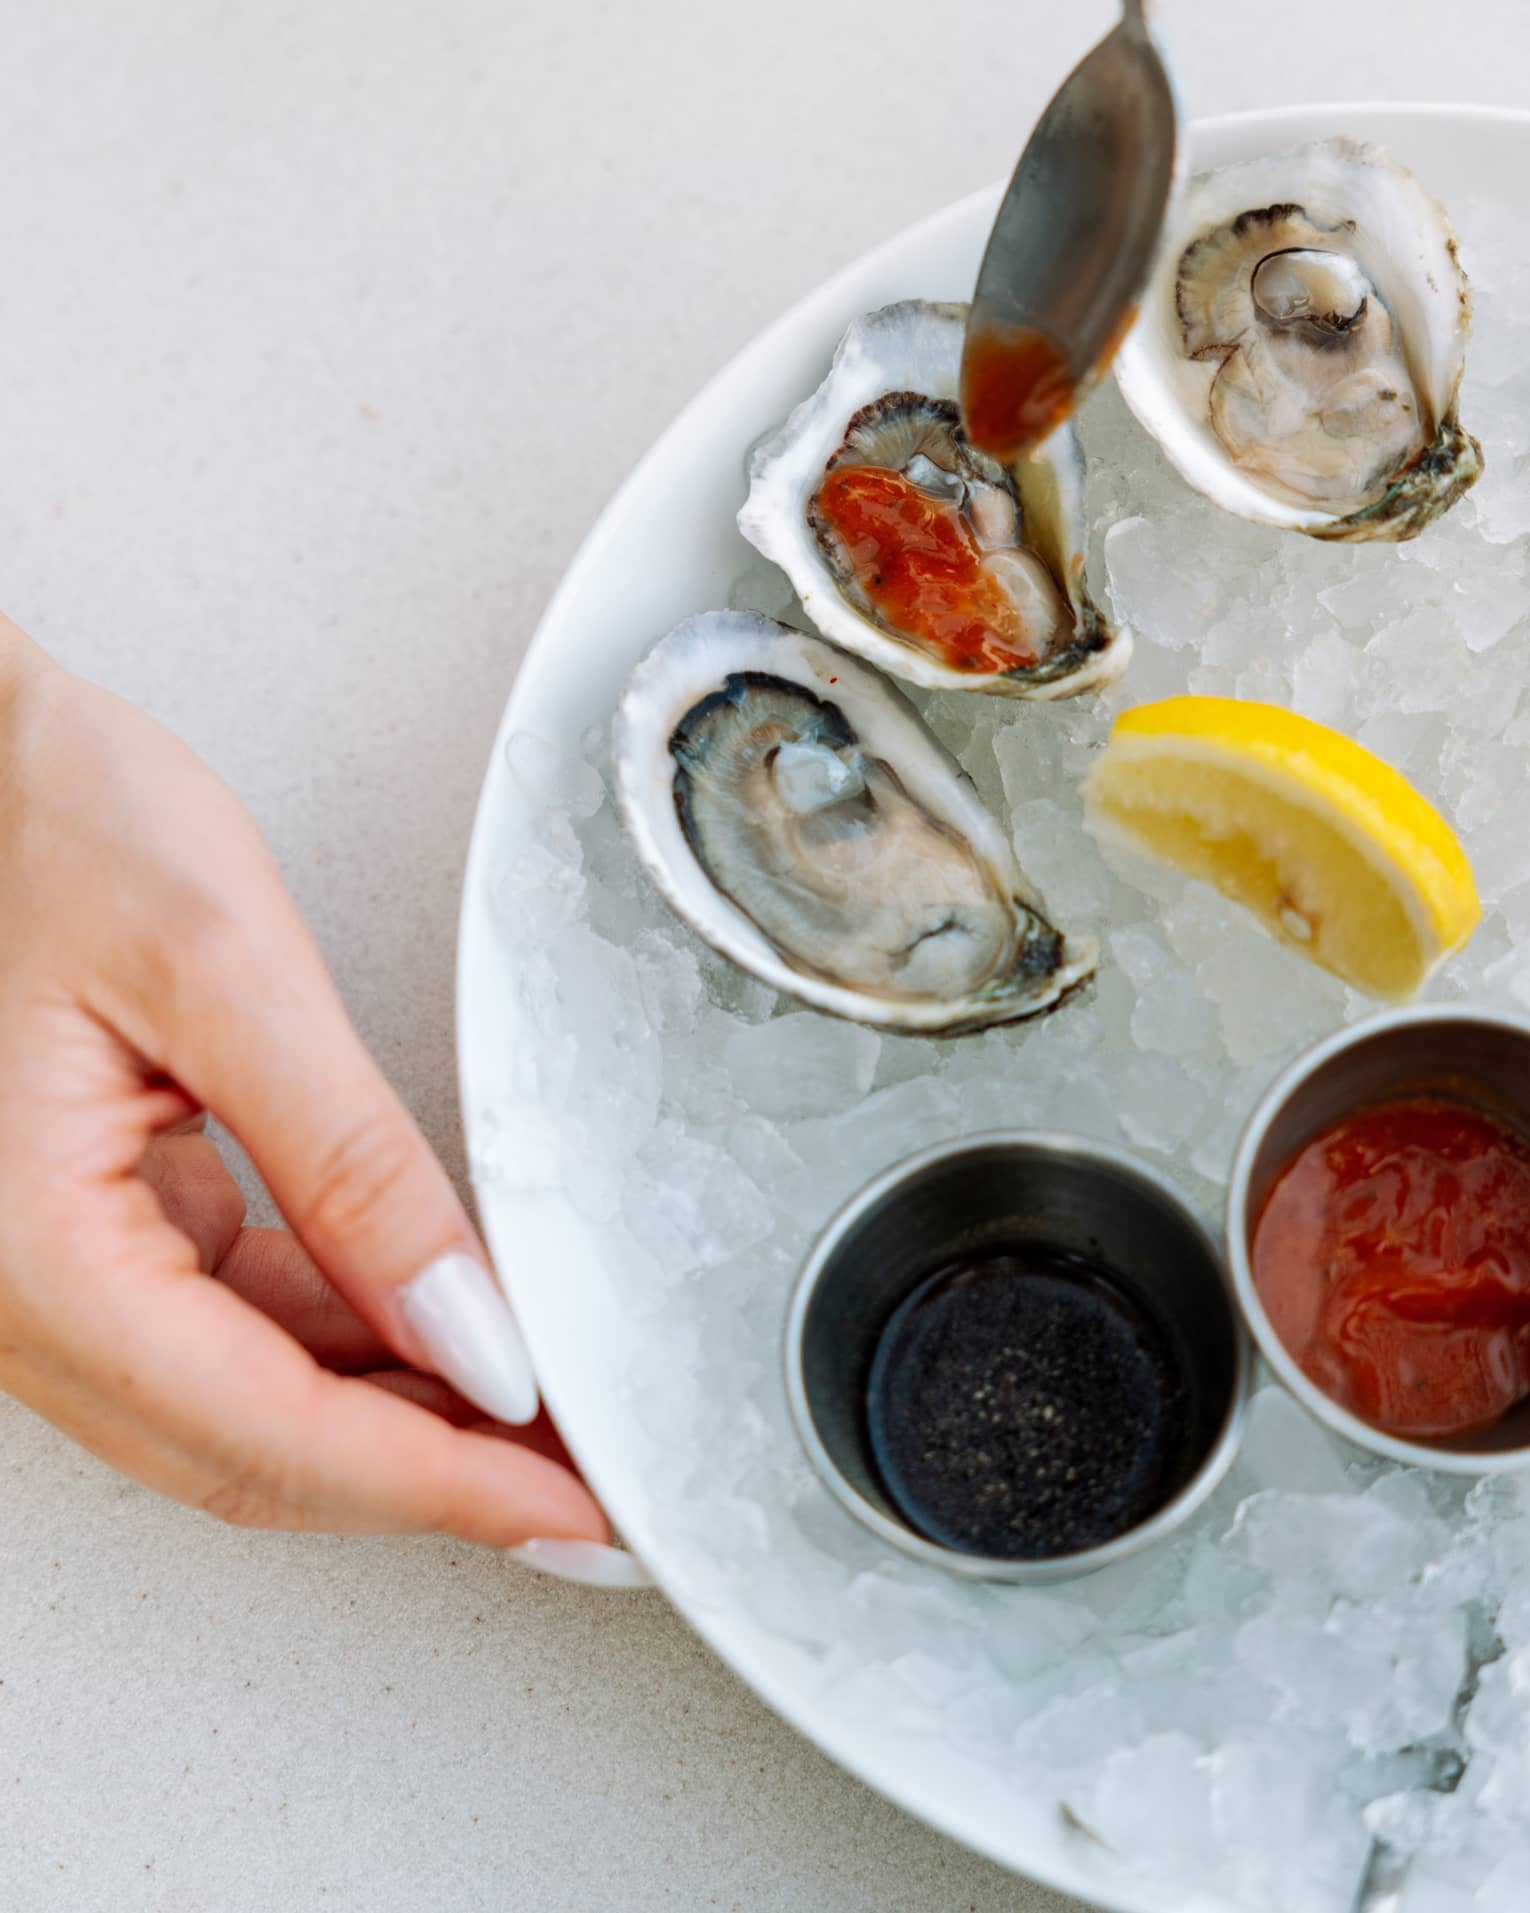 A manicured hand by a bowl of shucked oysters drizzled with red sauce, a lemon wedge and sauce cups on a bed of crushed ice.